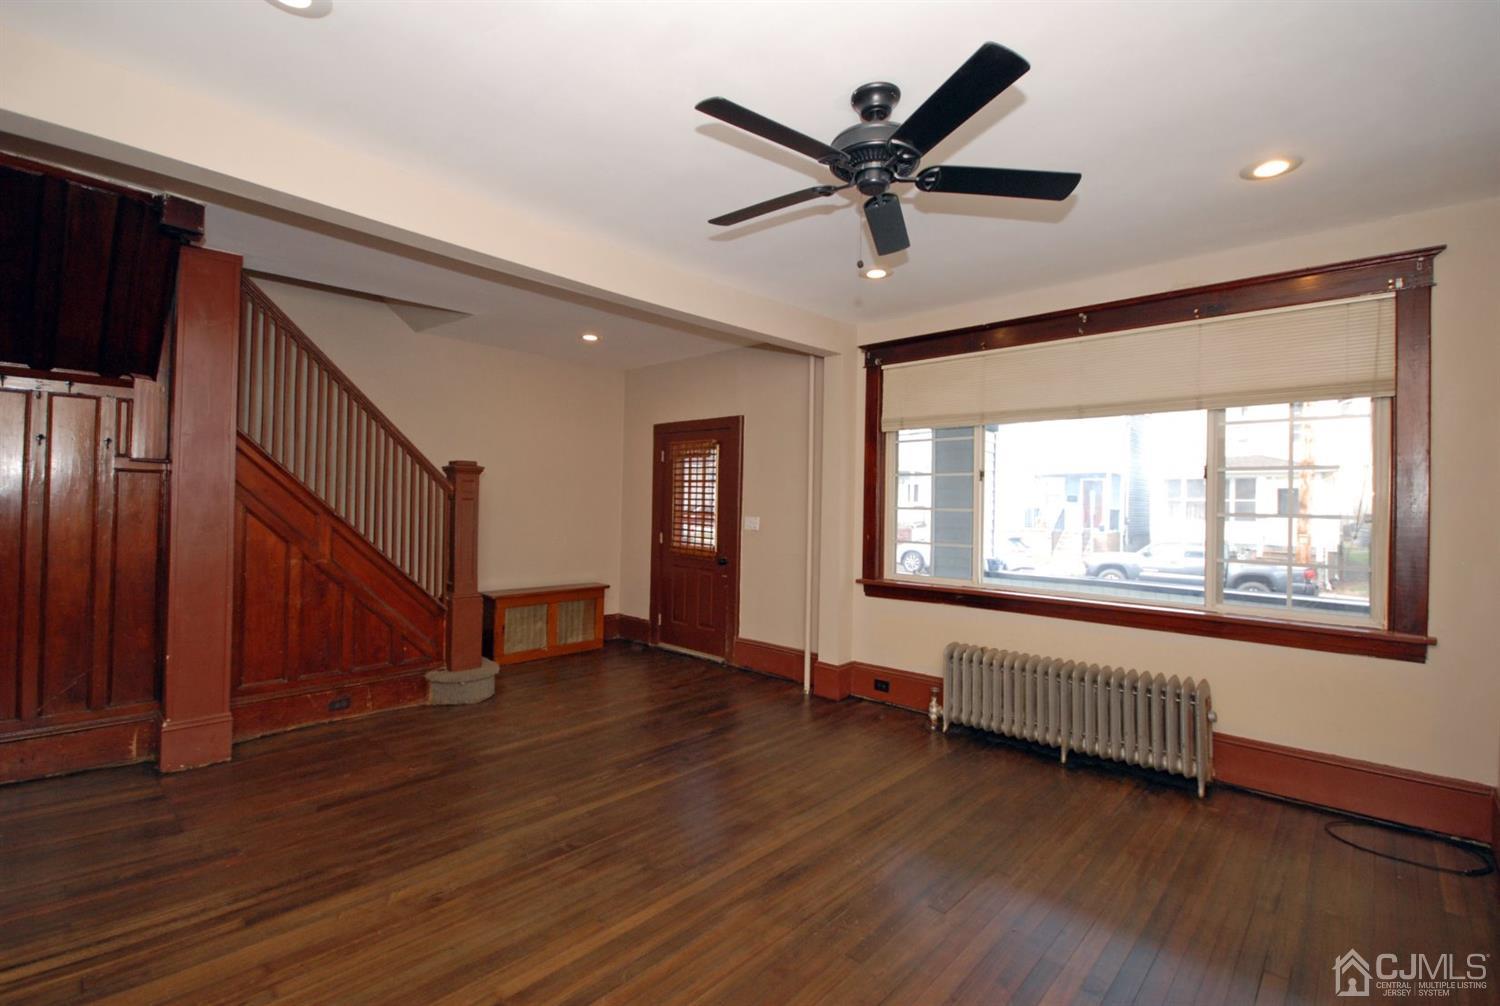 a view of a livingroom with a ceiling fan and window